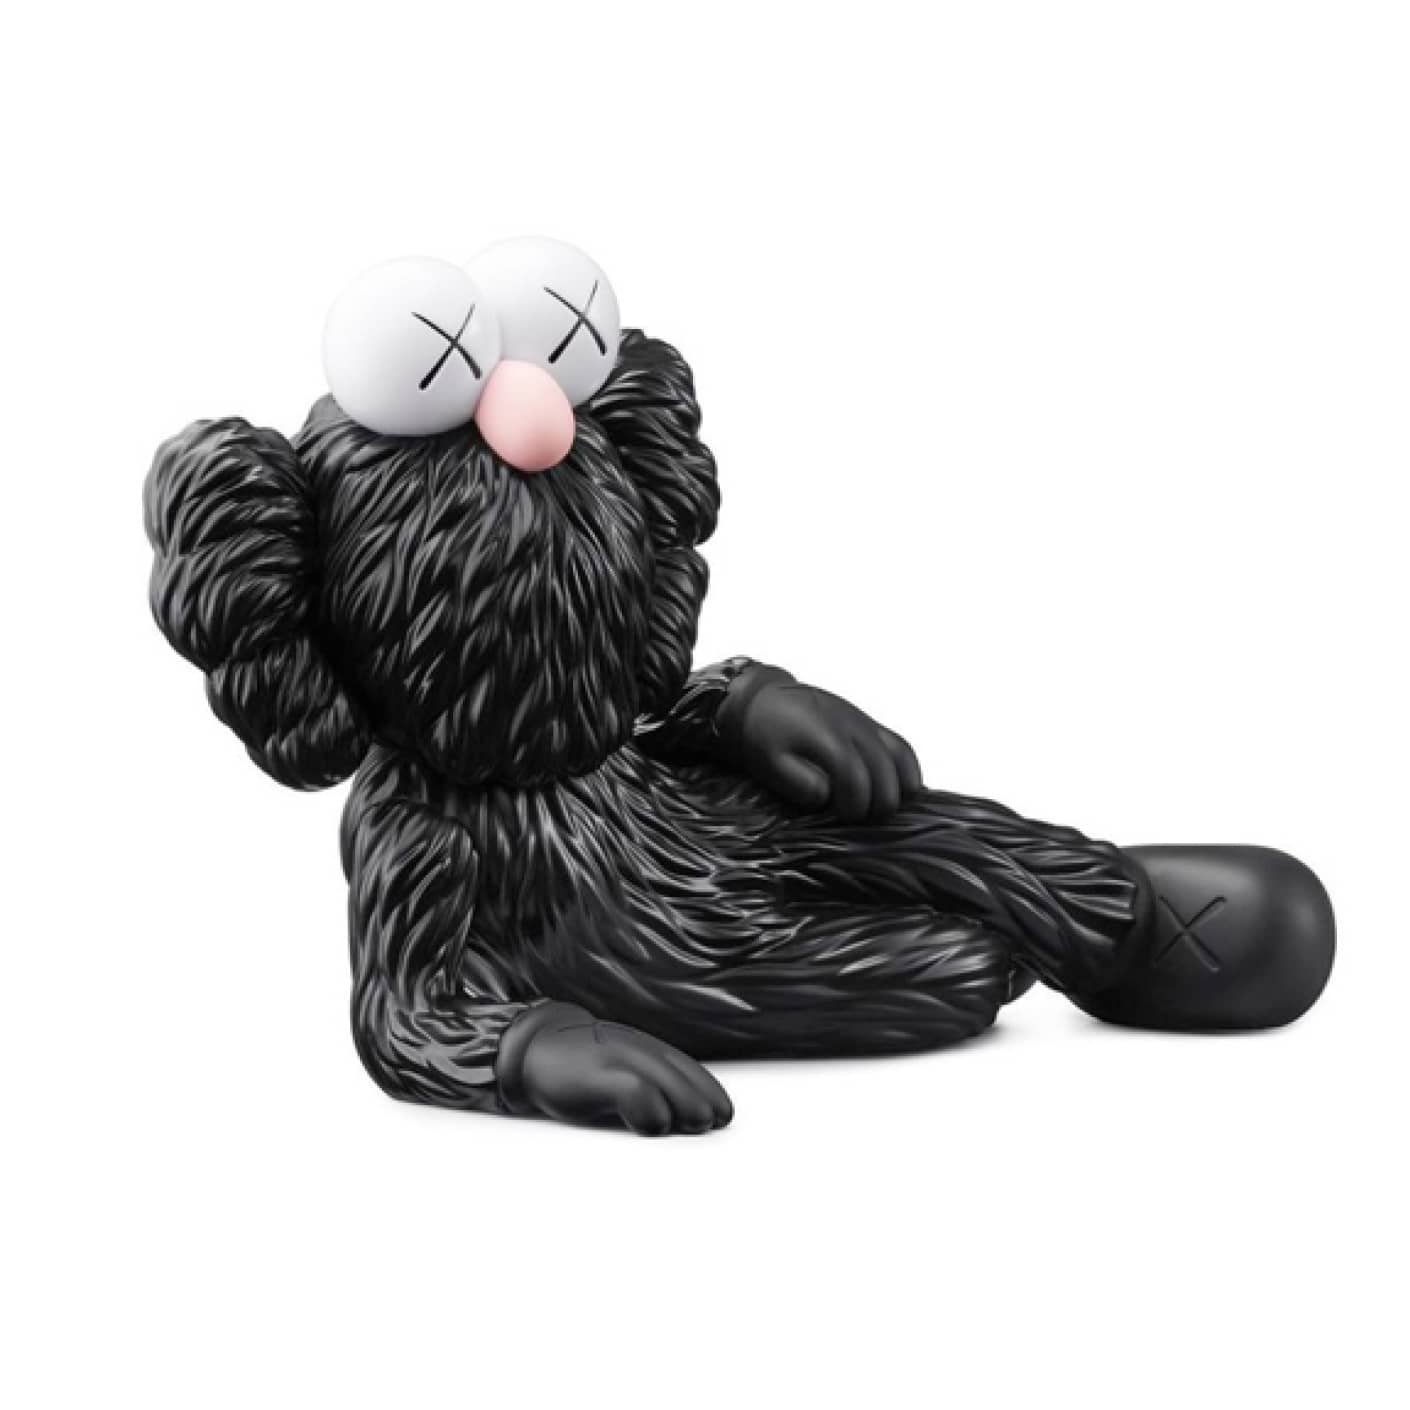 BFF Time off Black sculpture by Kaws - Dope! Gallery